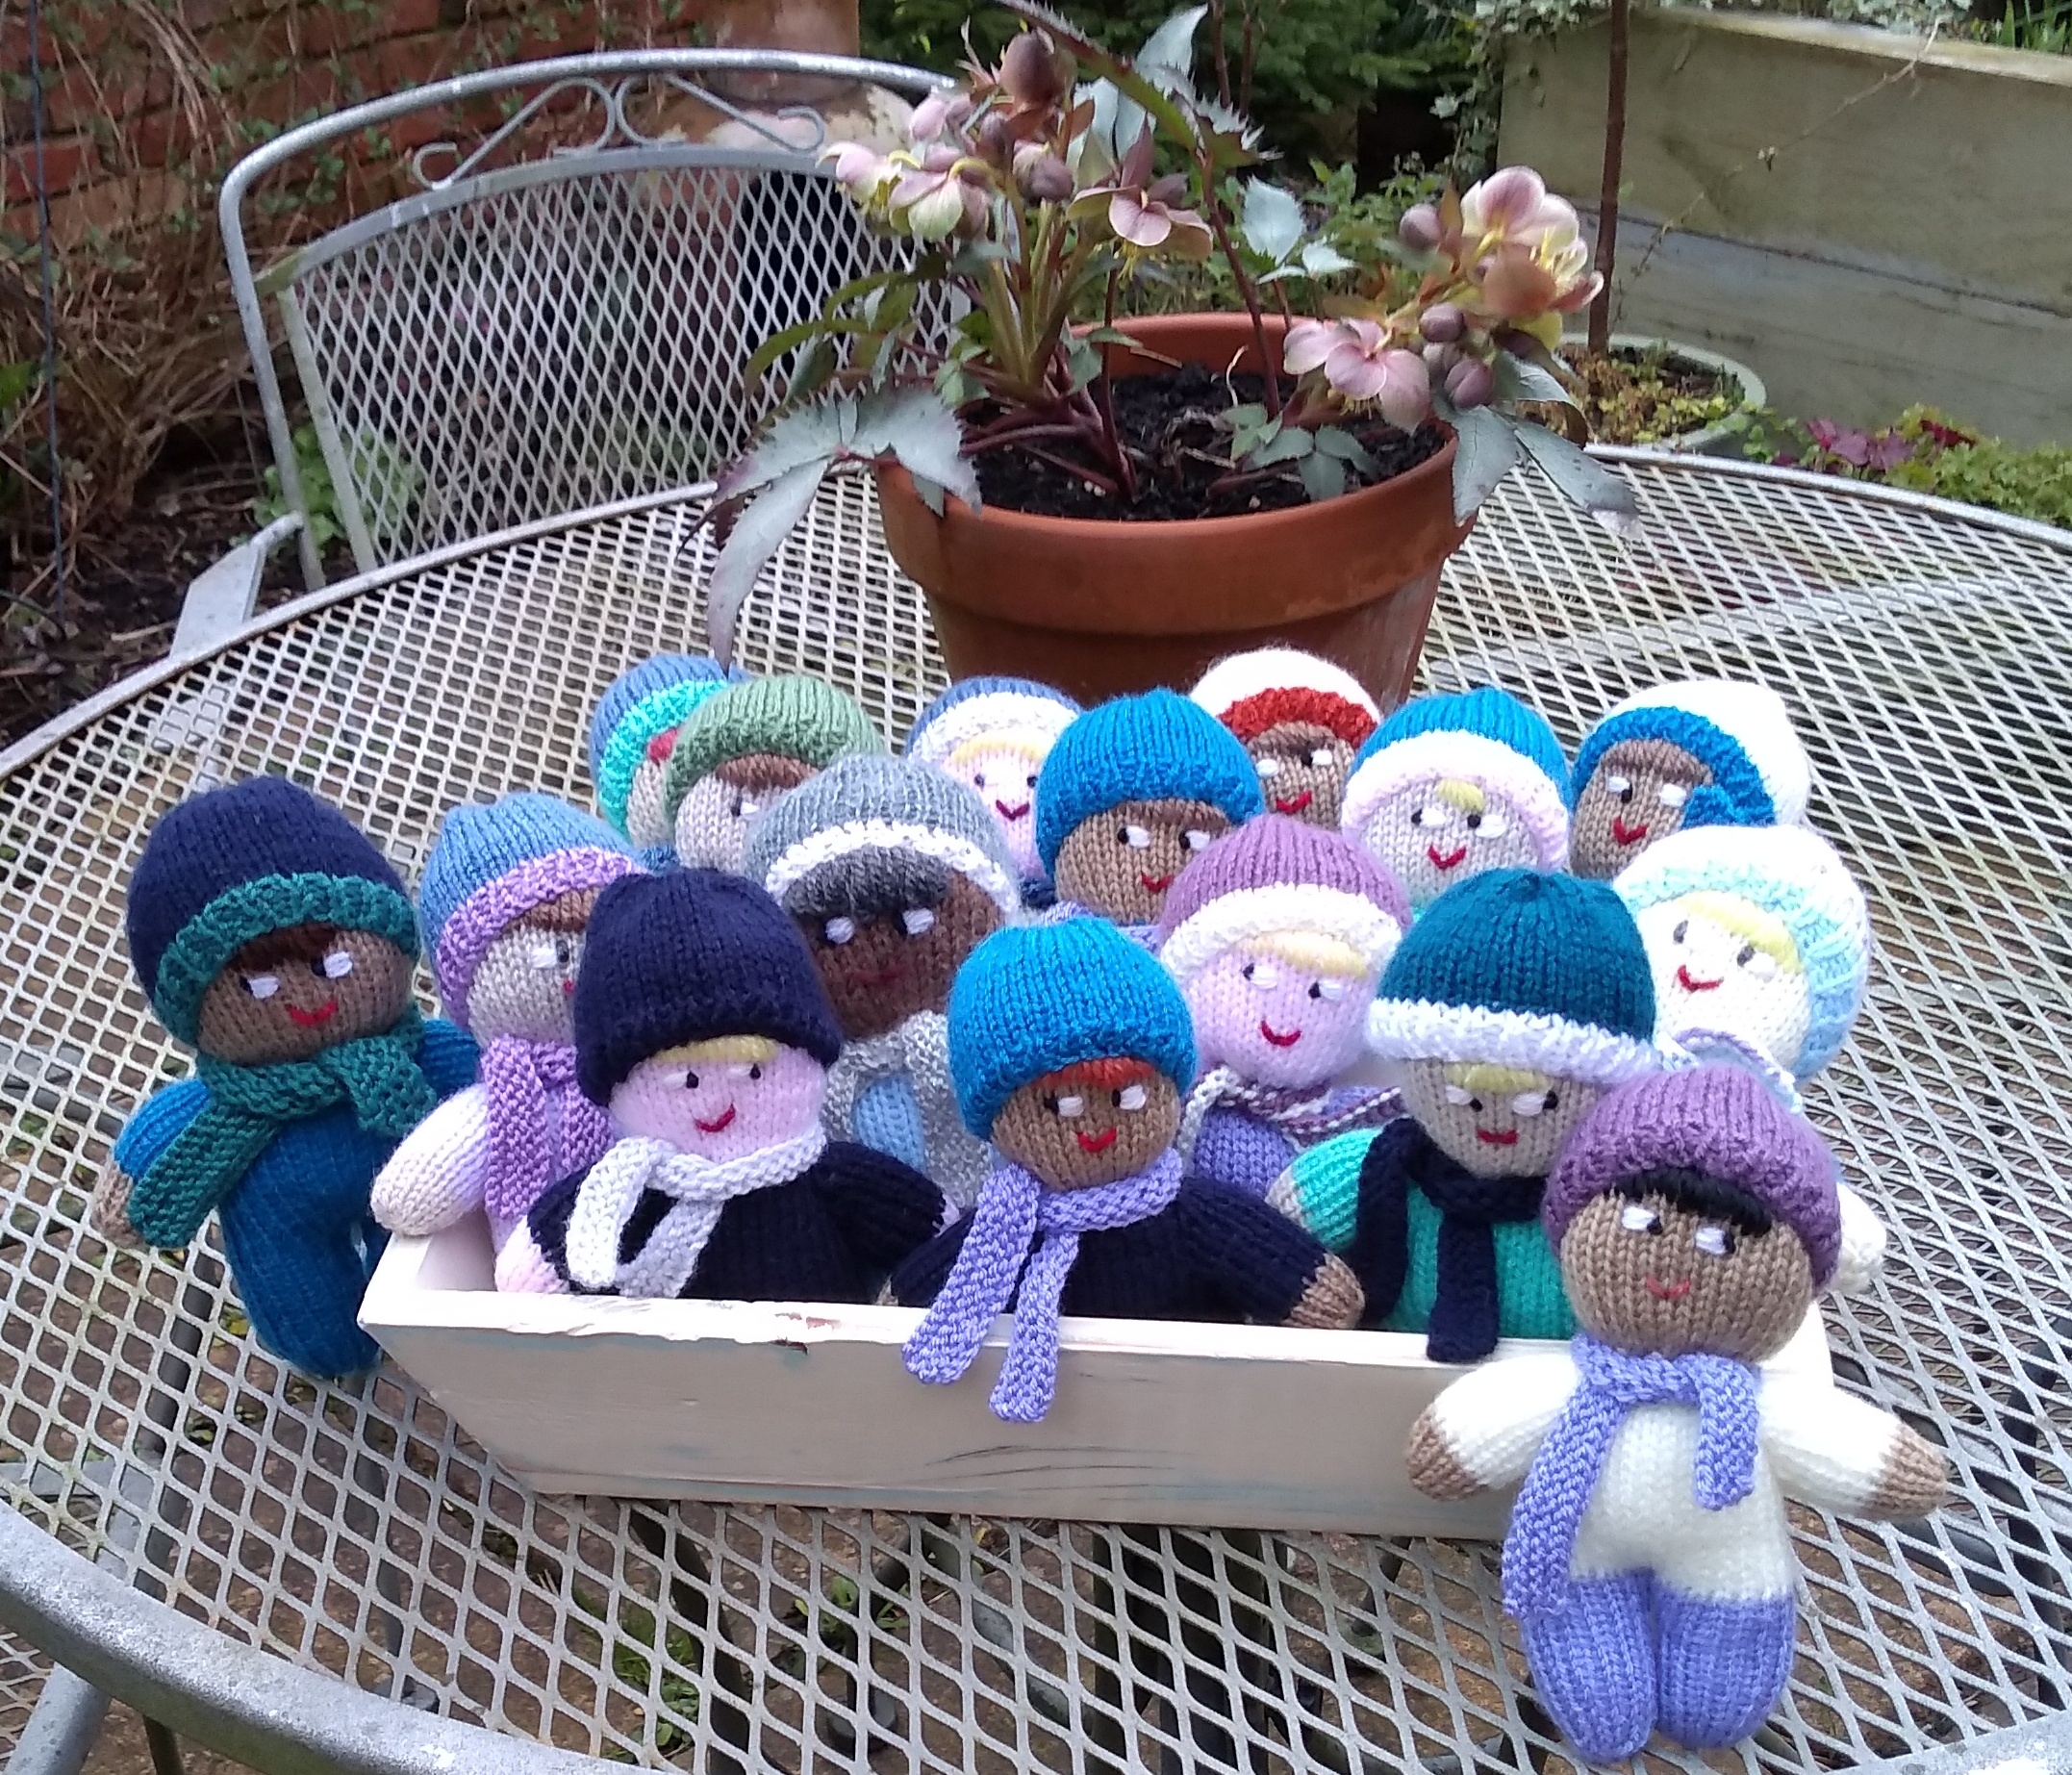 A box of knitted mascots.